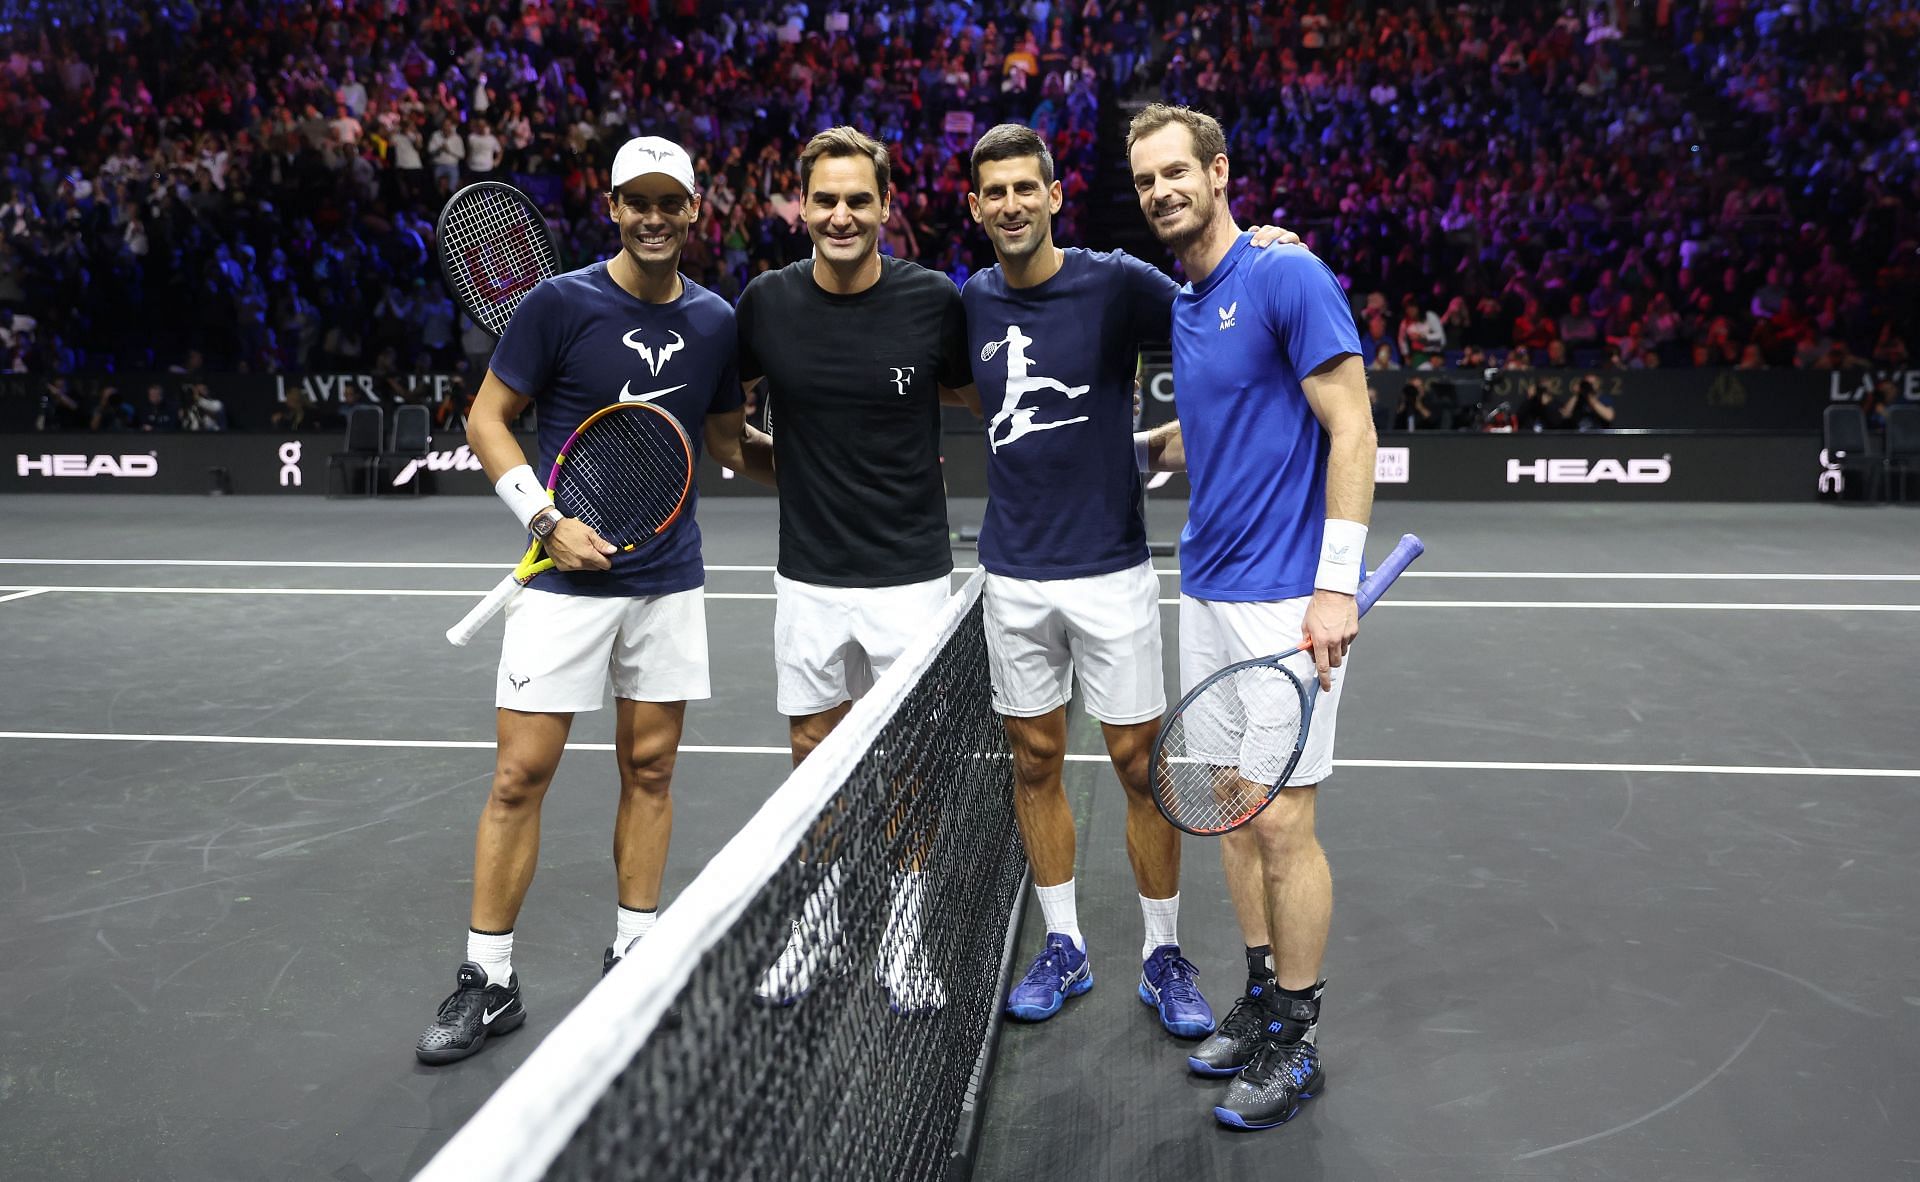 Federer, Nadal, Djokovic, and Murray during a practice session at the Laver Cup